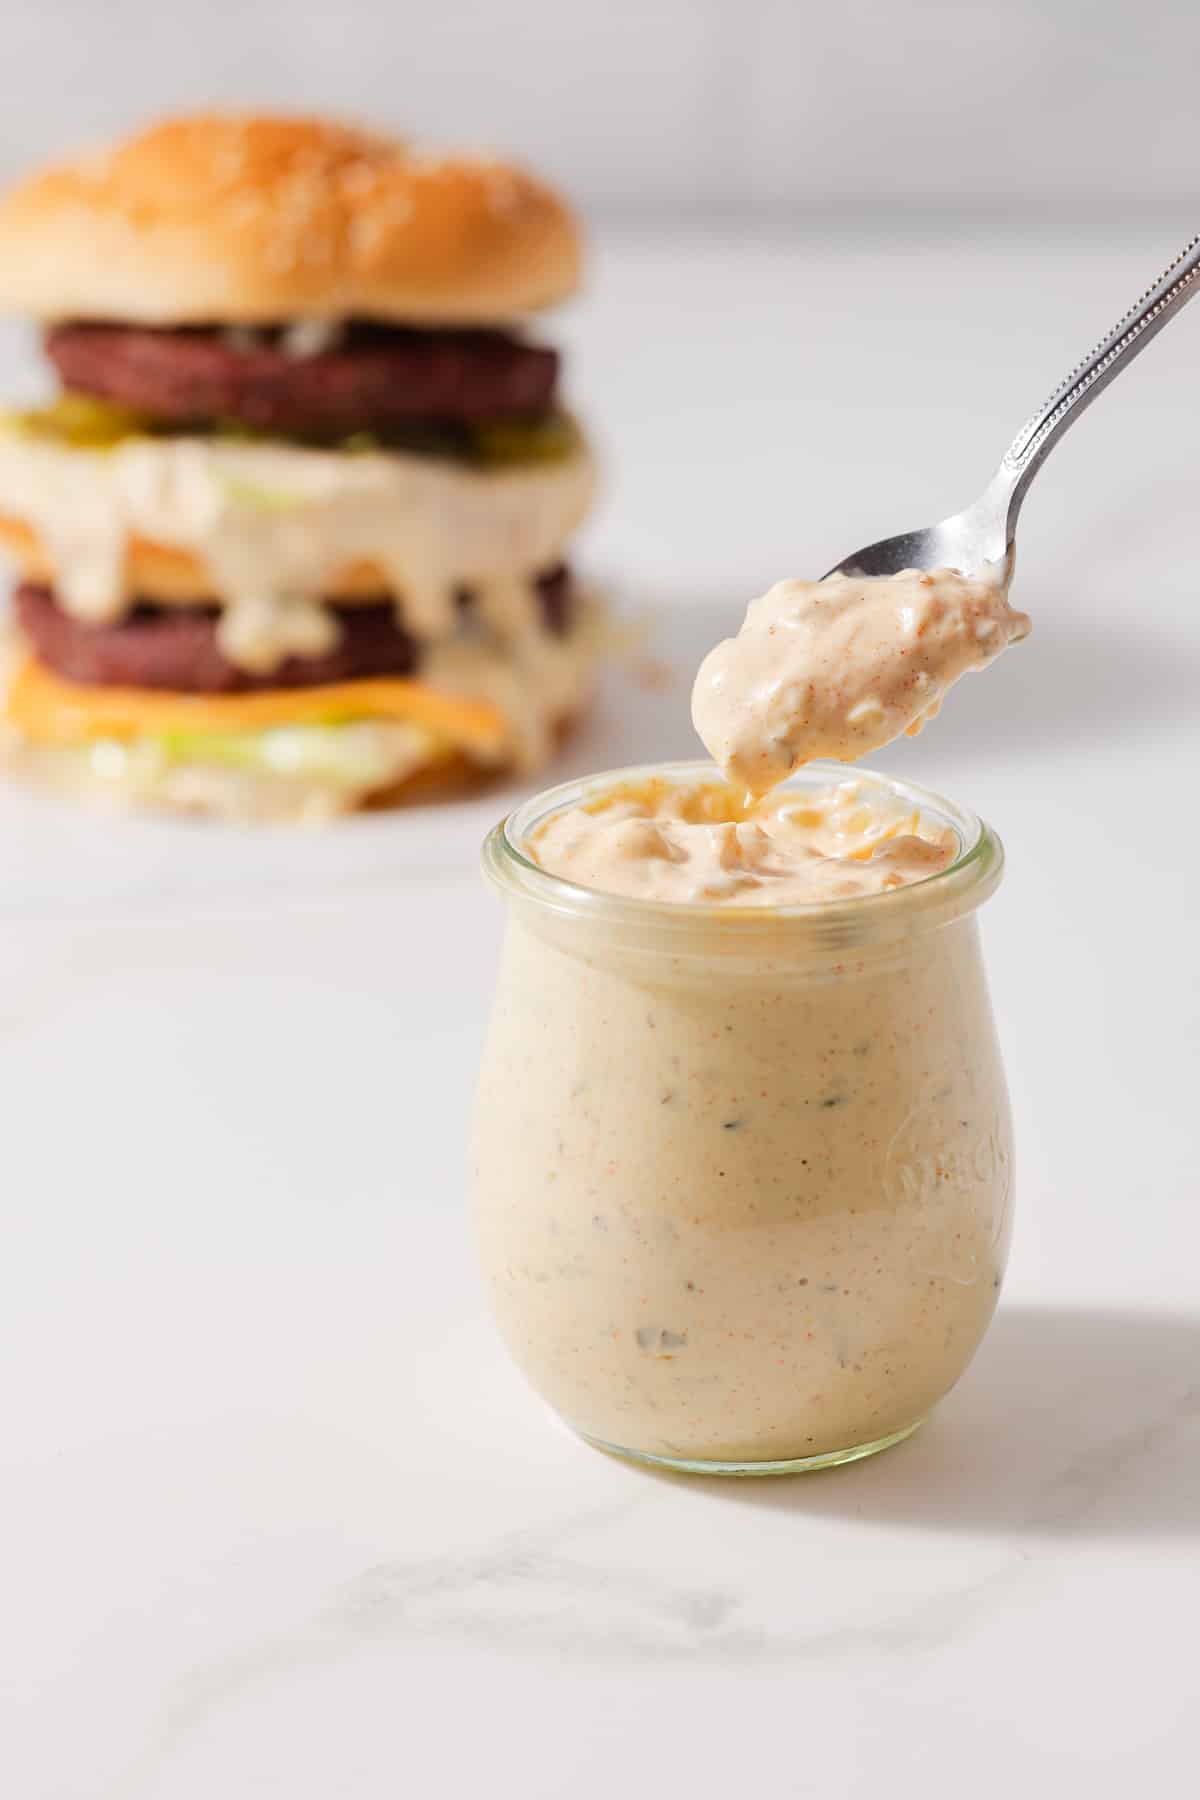 Spoon scooping out big mac sauce out of a jar.